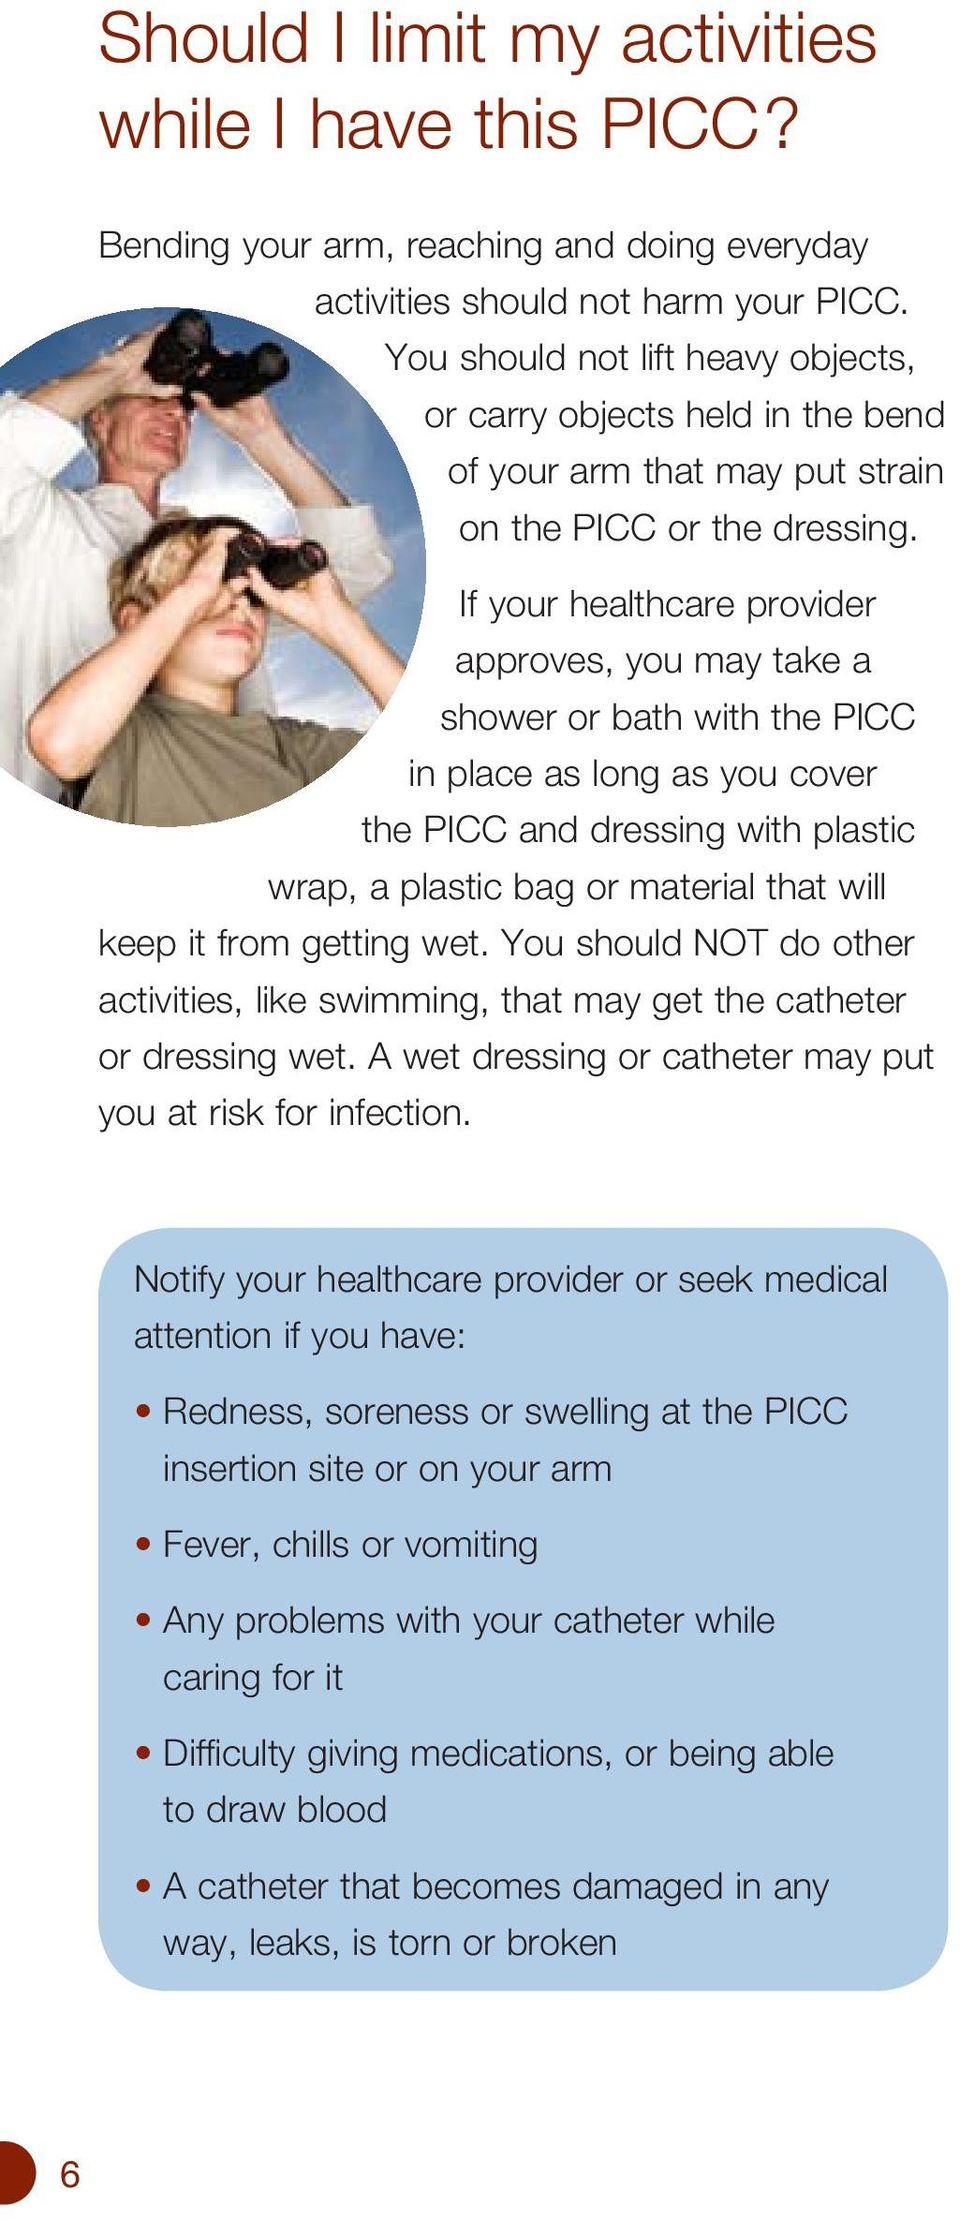 If your healthcare provider approves, you may take a shower or bath with the PICC in place as long as you cover the PICC and dressing with plastic wrap, a plastic bag or material that will keep it